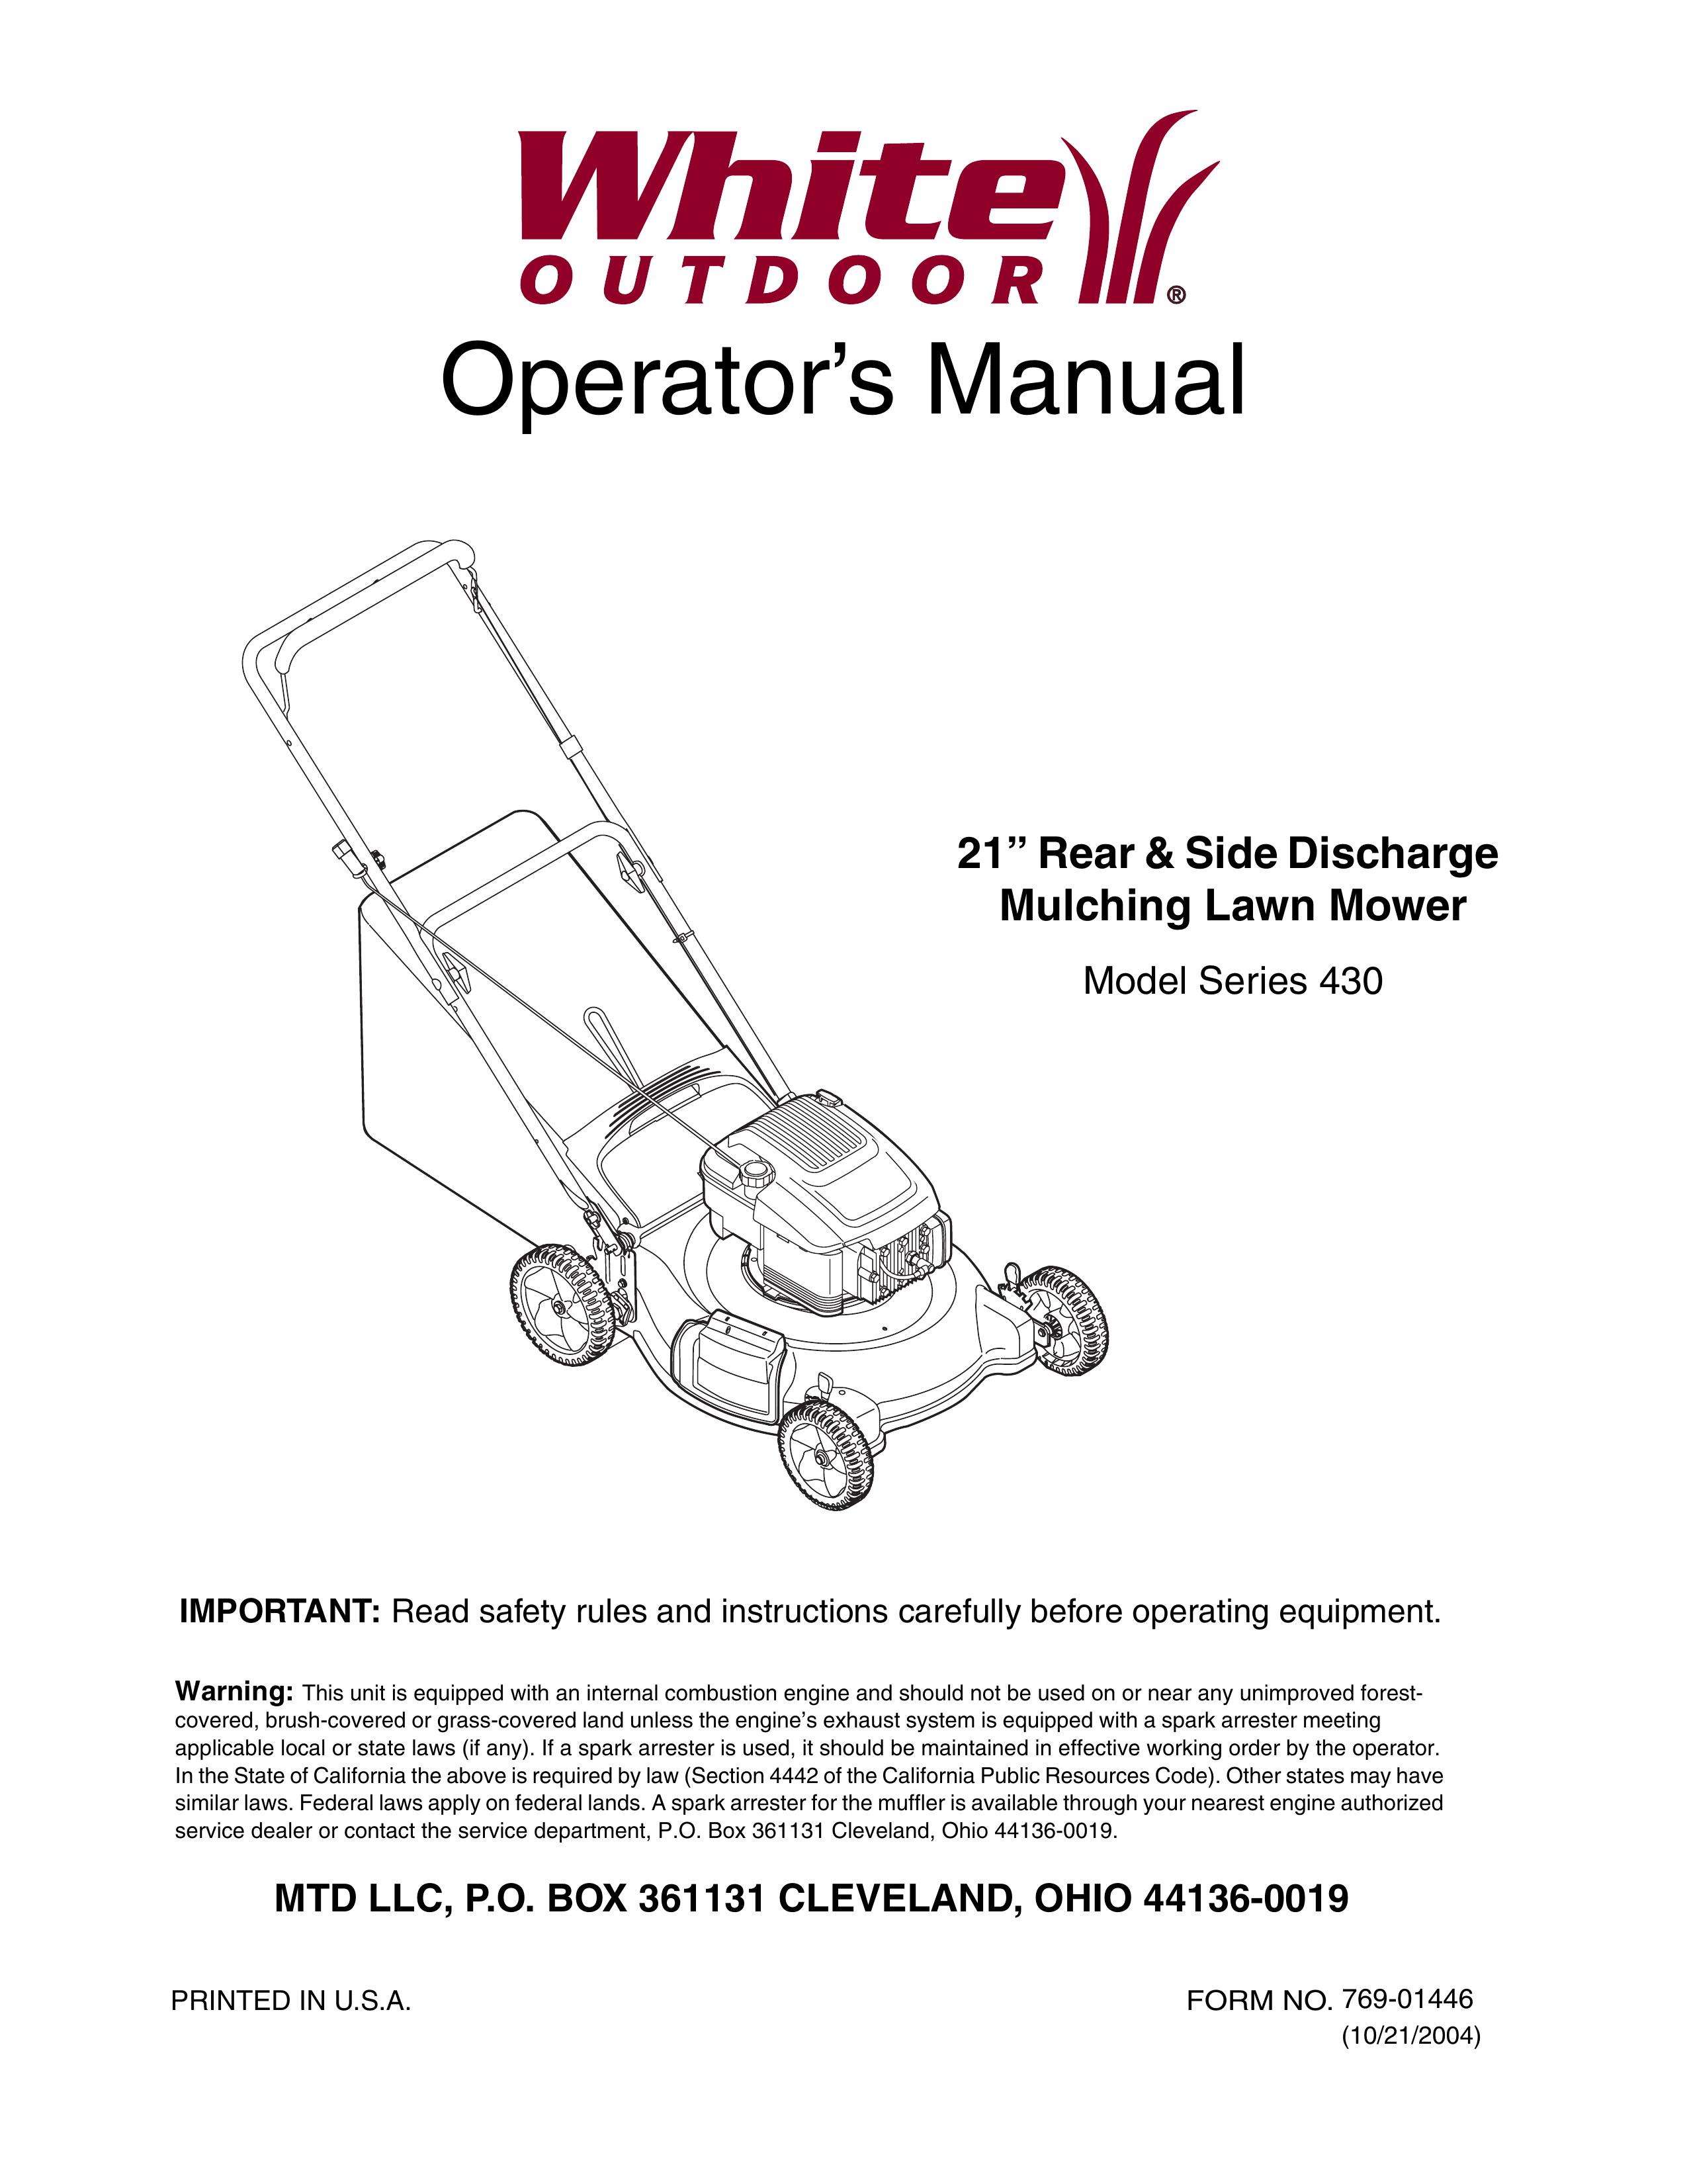 White Outdoor 430 Lawn Mower User Manual